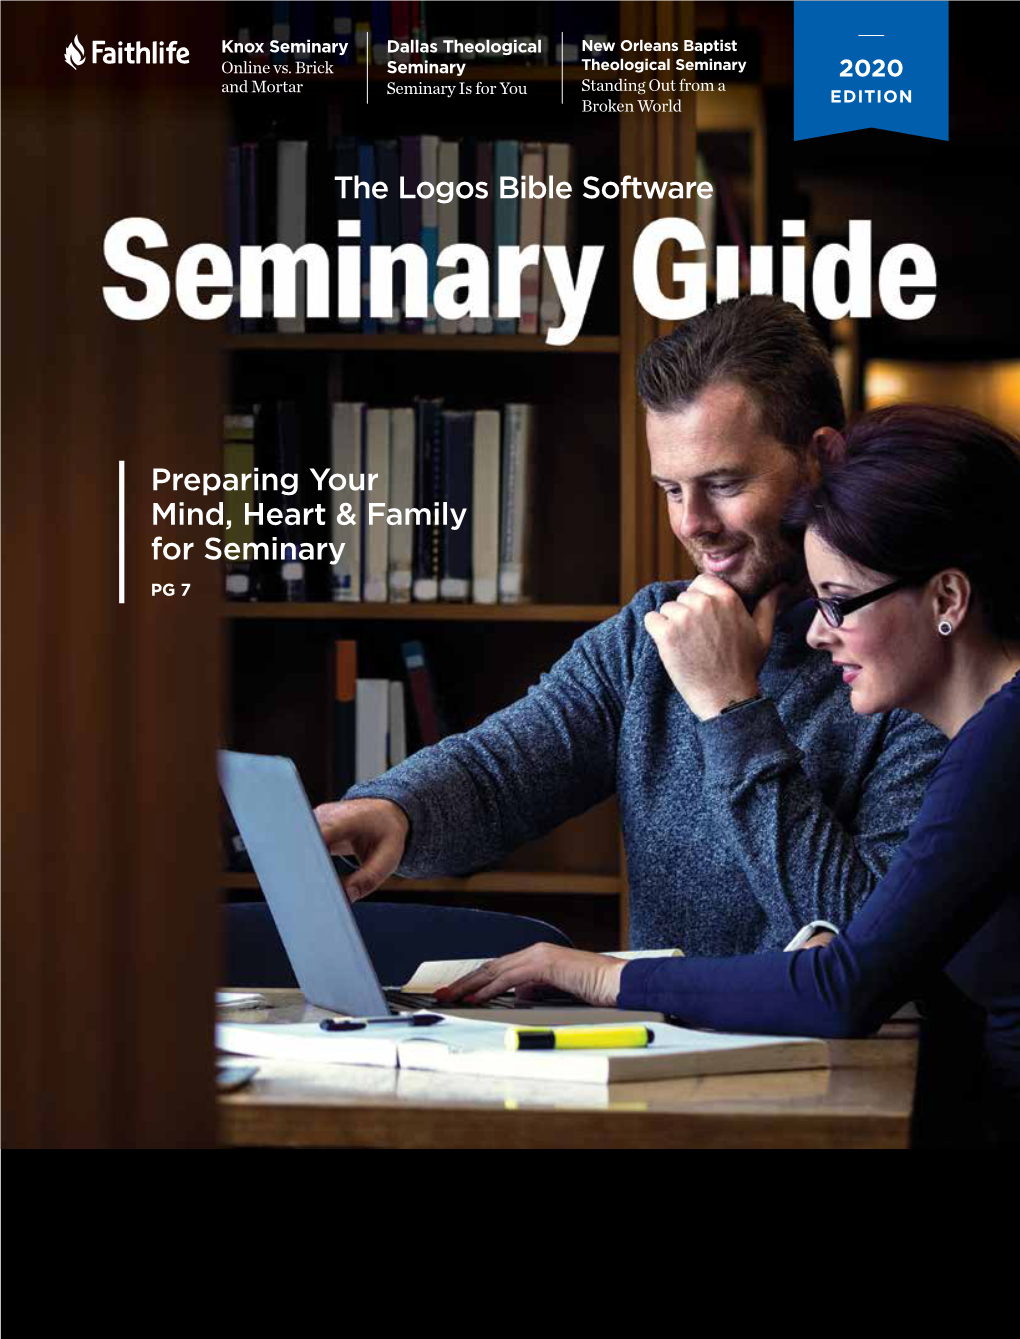 Preparing Your Mind, Heart & Family for Seminary the Logos Bible